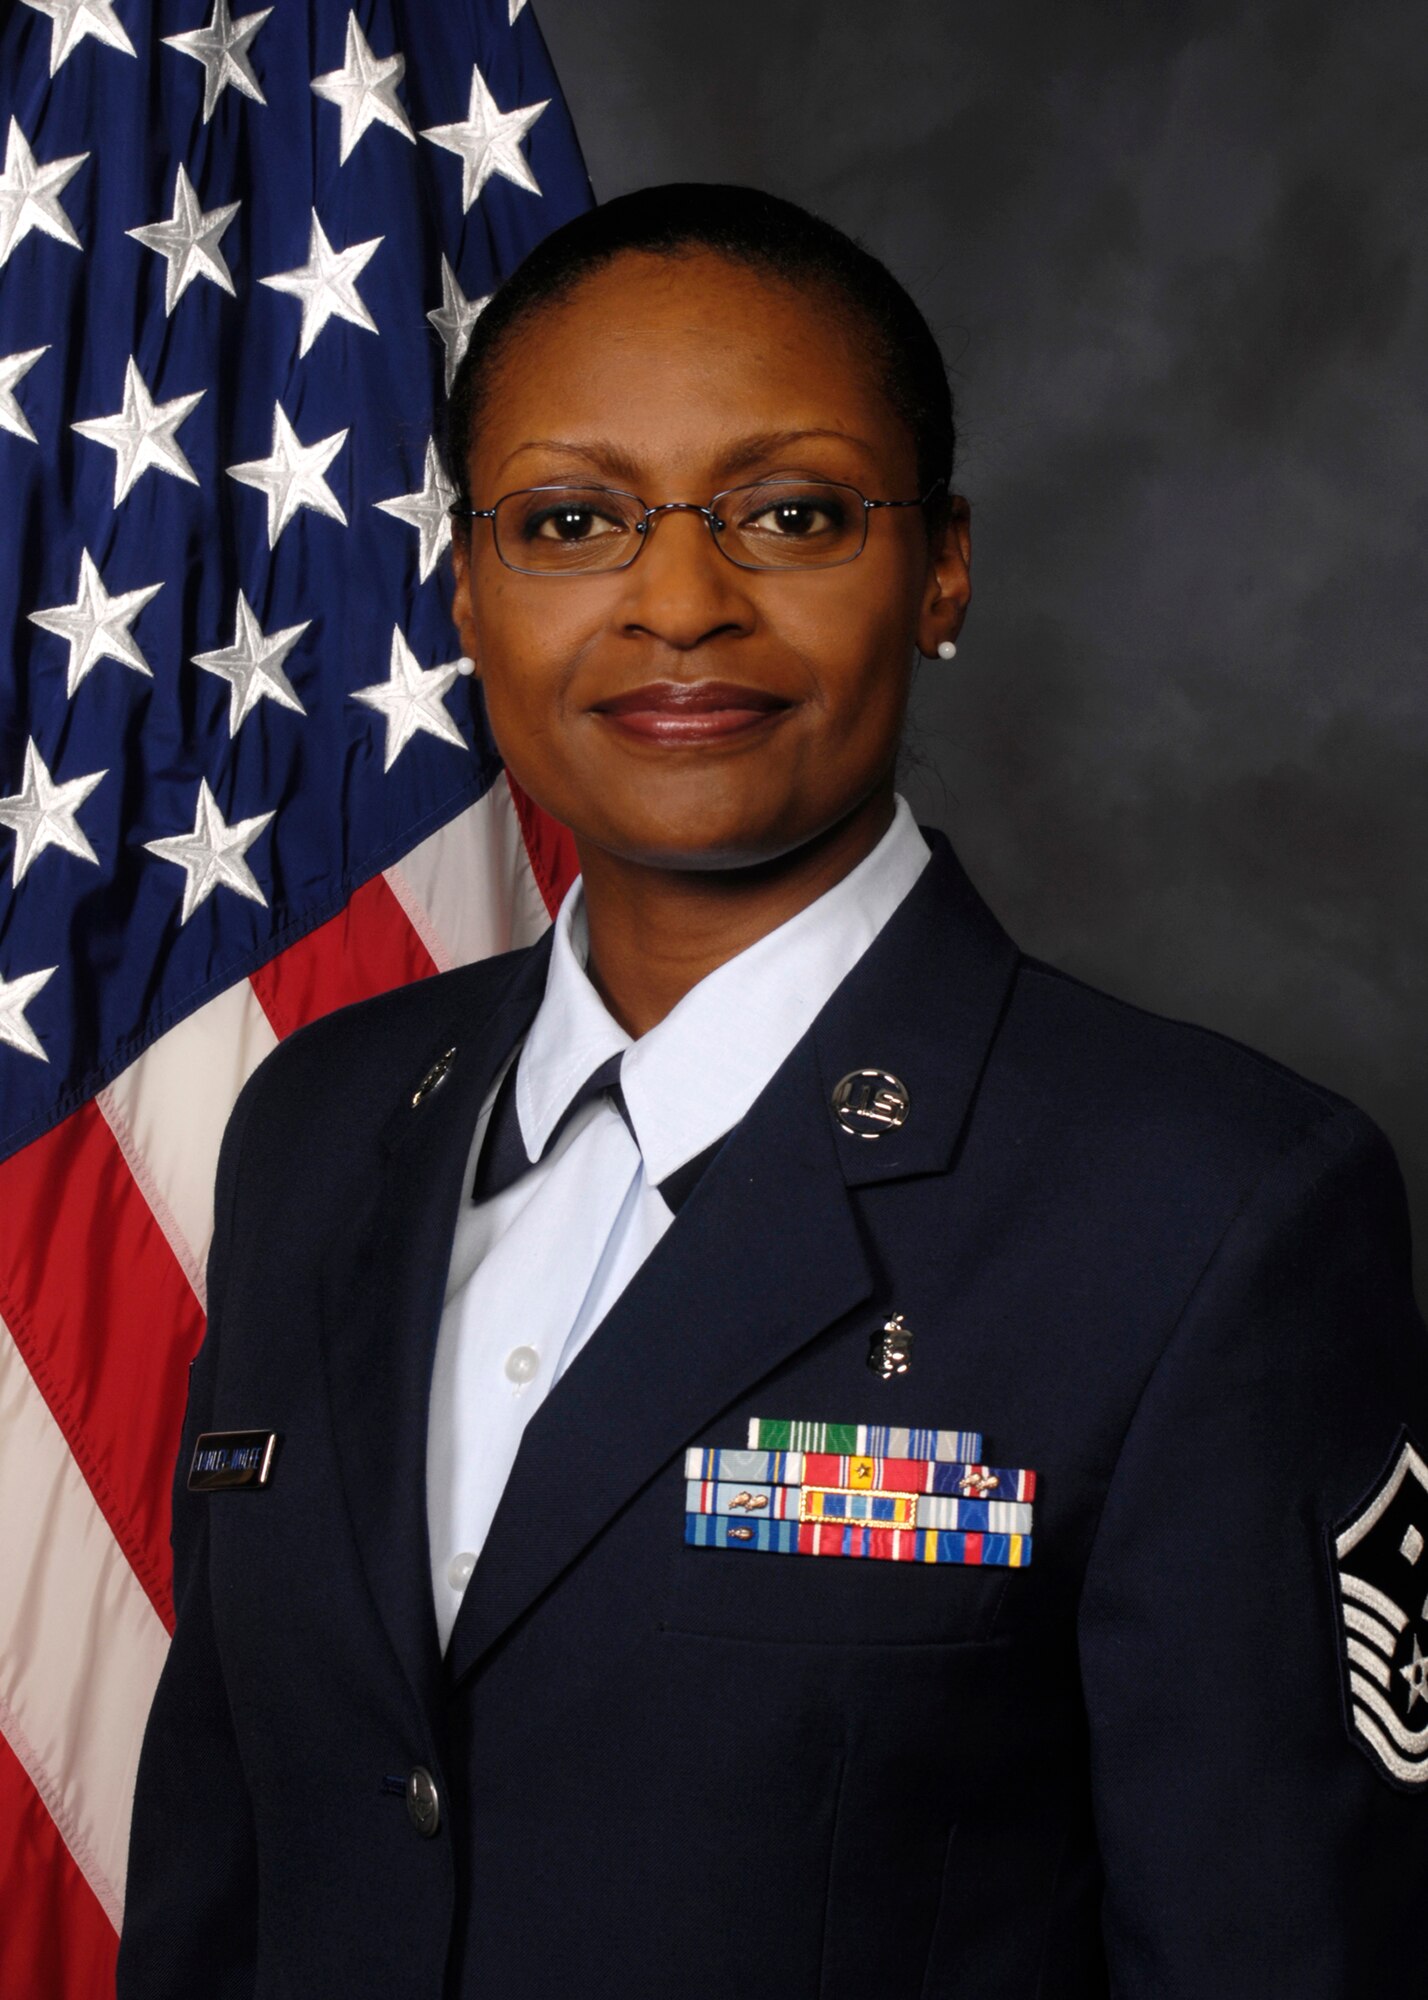 WRIGHT-PATTERSON AIR FORCE BASE, Ohio - Master Sgt. Karen Stanley-Wolfe, 445th Operations Support Squadron first sergeant, is taking an Air Guard Reserve assignment at March Air Reserve Base in California mid-February.